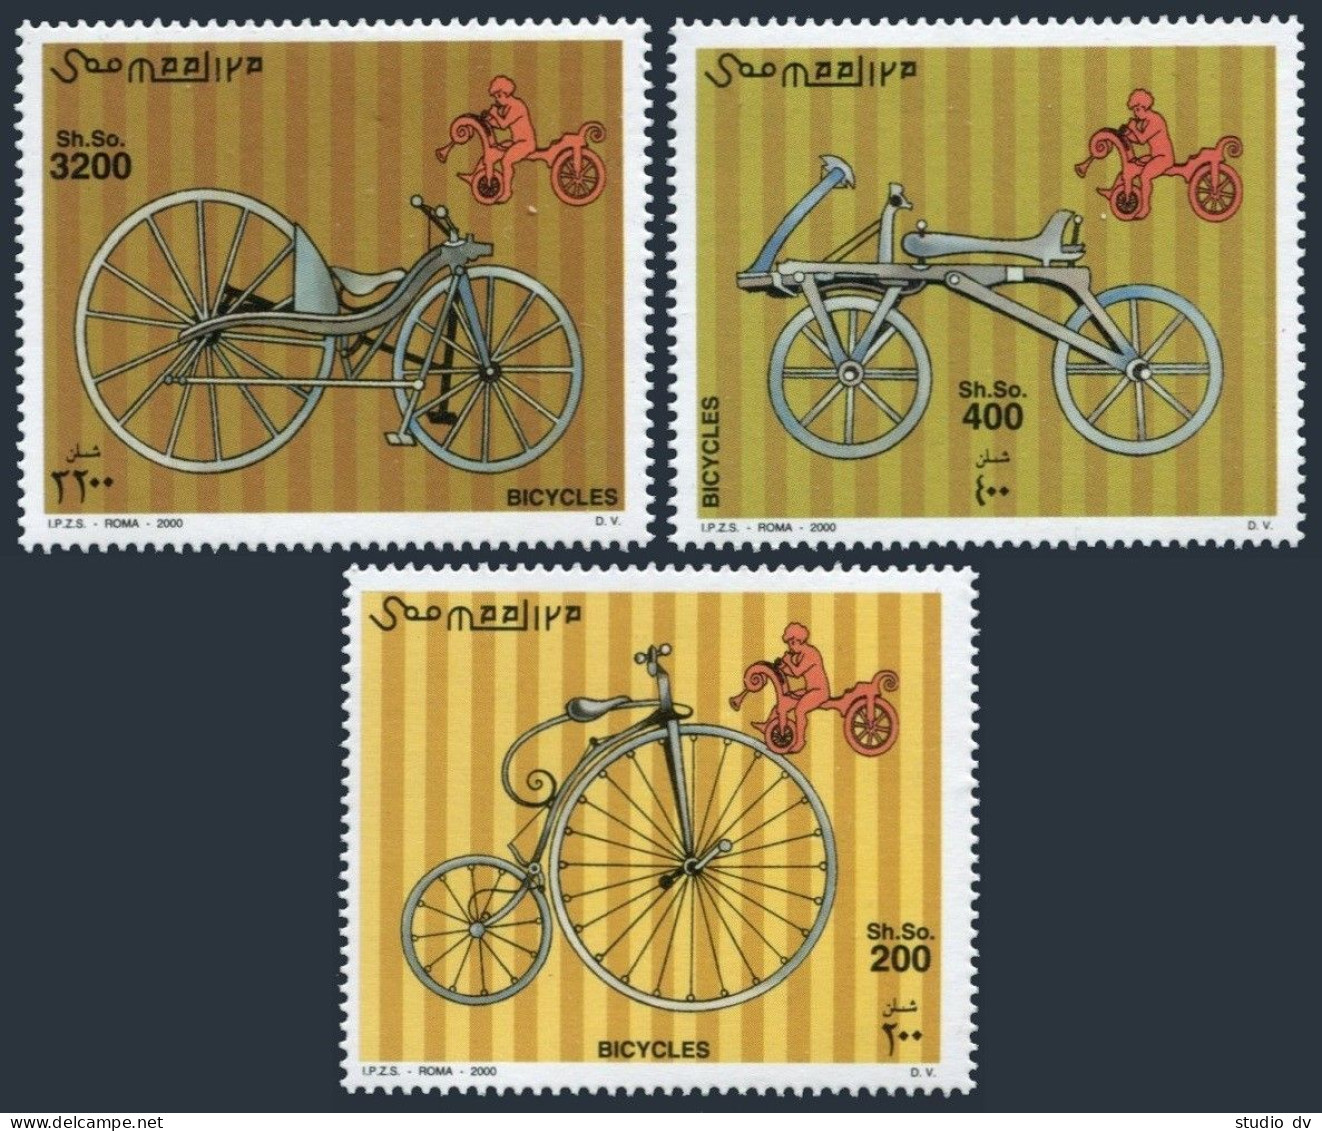 Somalia 819-821 Michel,not Listed In Scott,MNH. Bicycles 2000. - Somalie (1960-...)